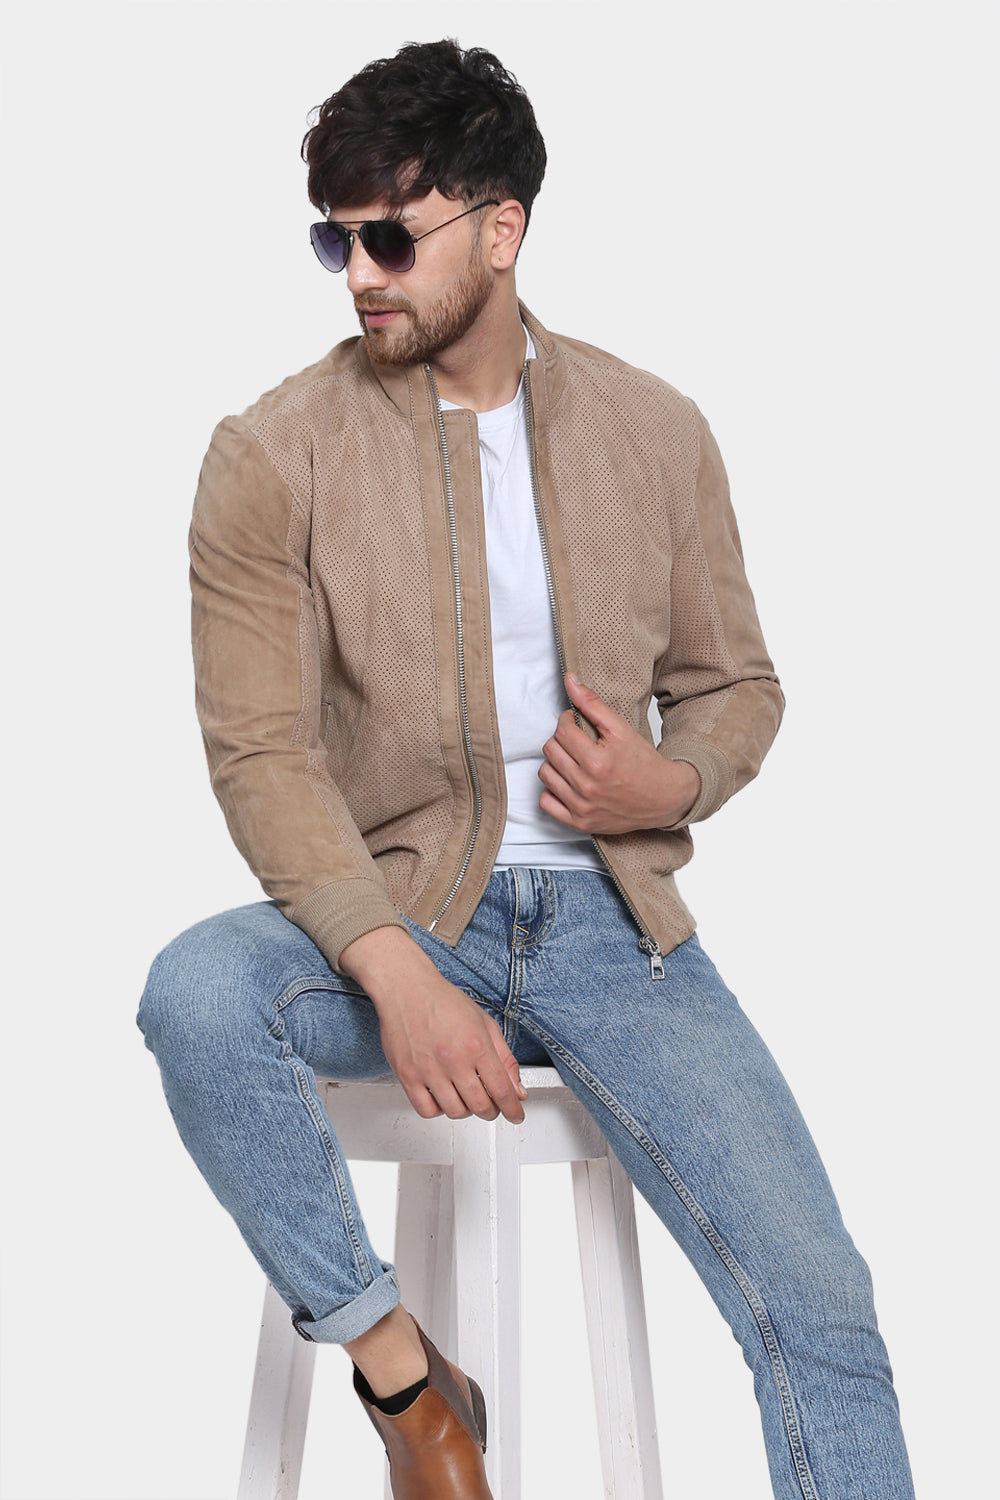 Justanned Solid Suede Leather Jacket